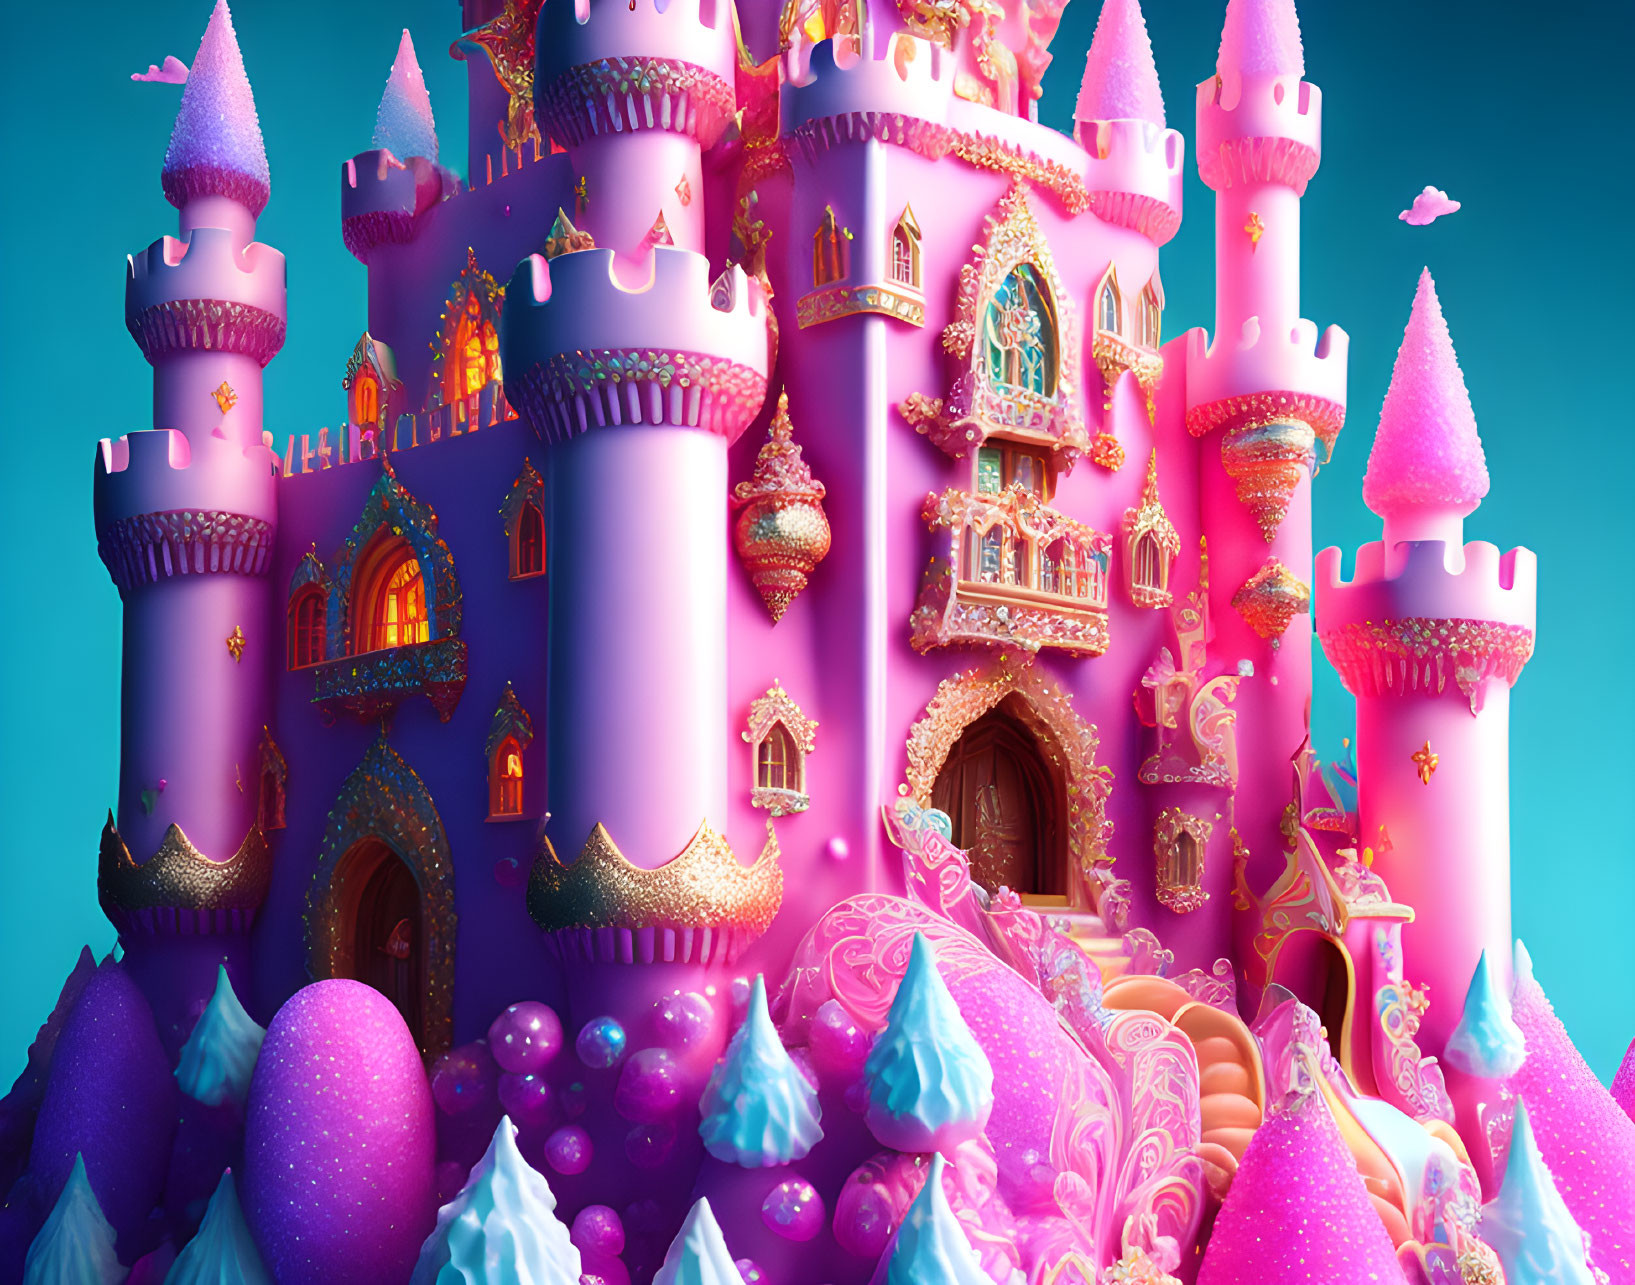 Whimsical Pink Castle with Gold Accents and Pink Trees